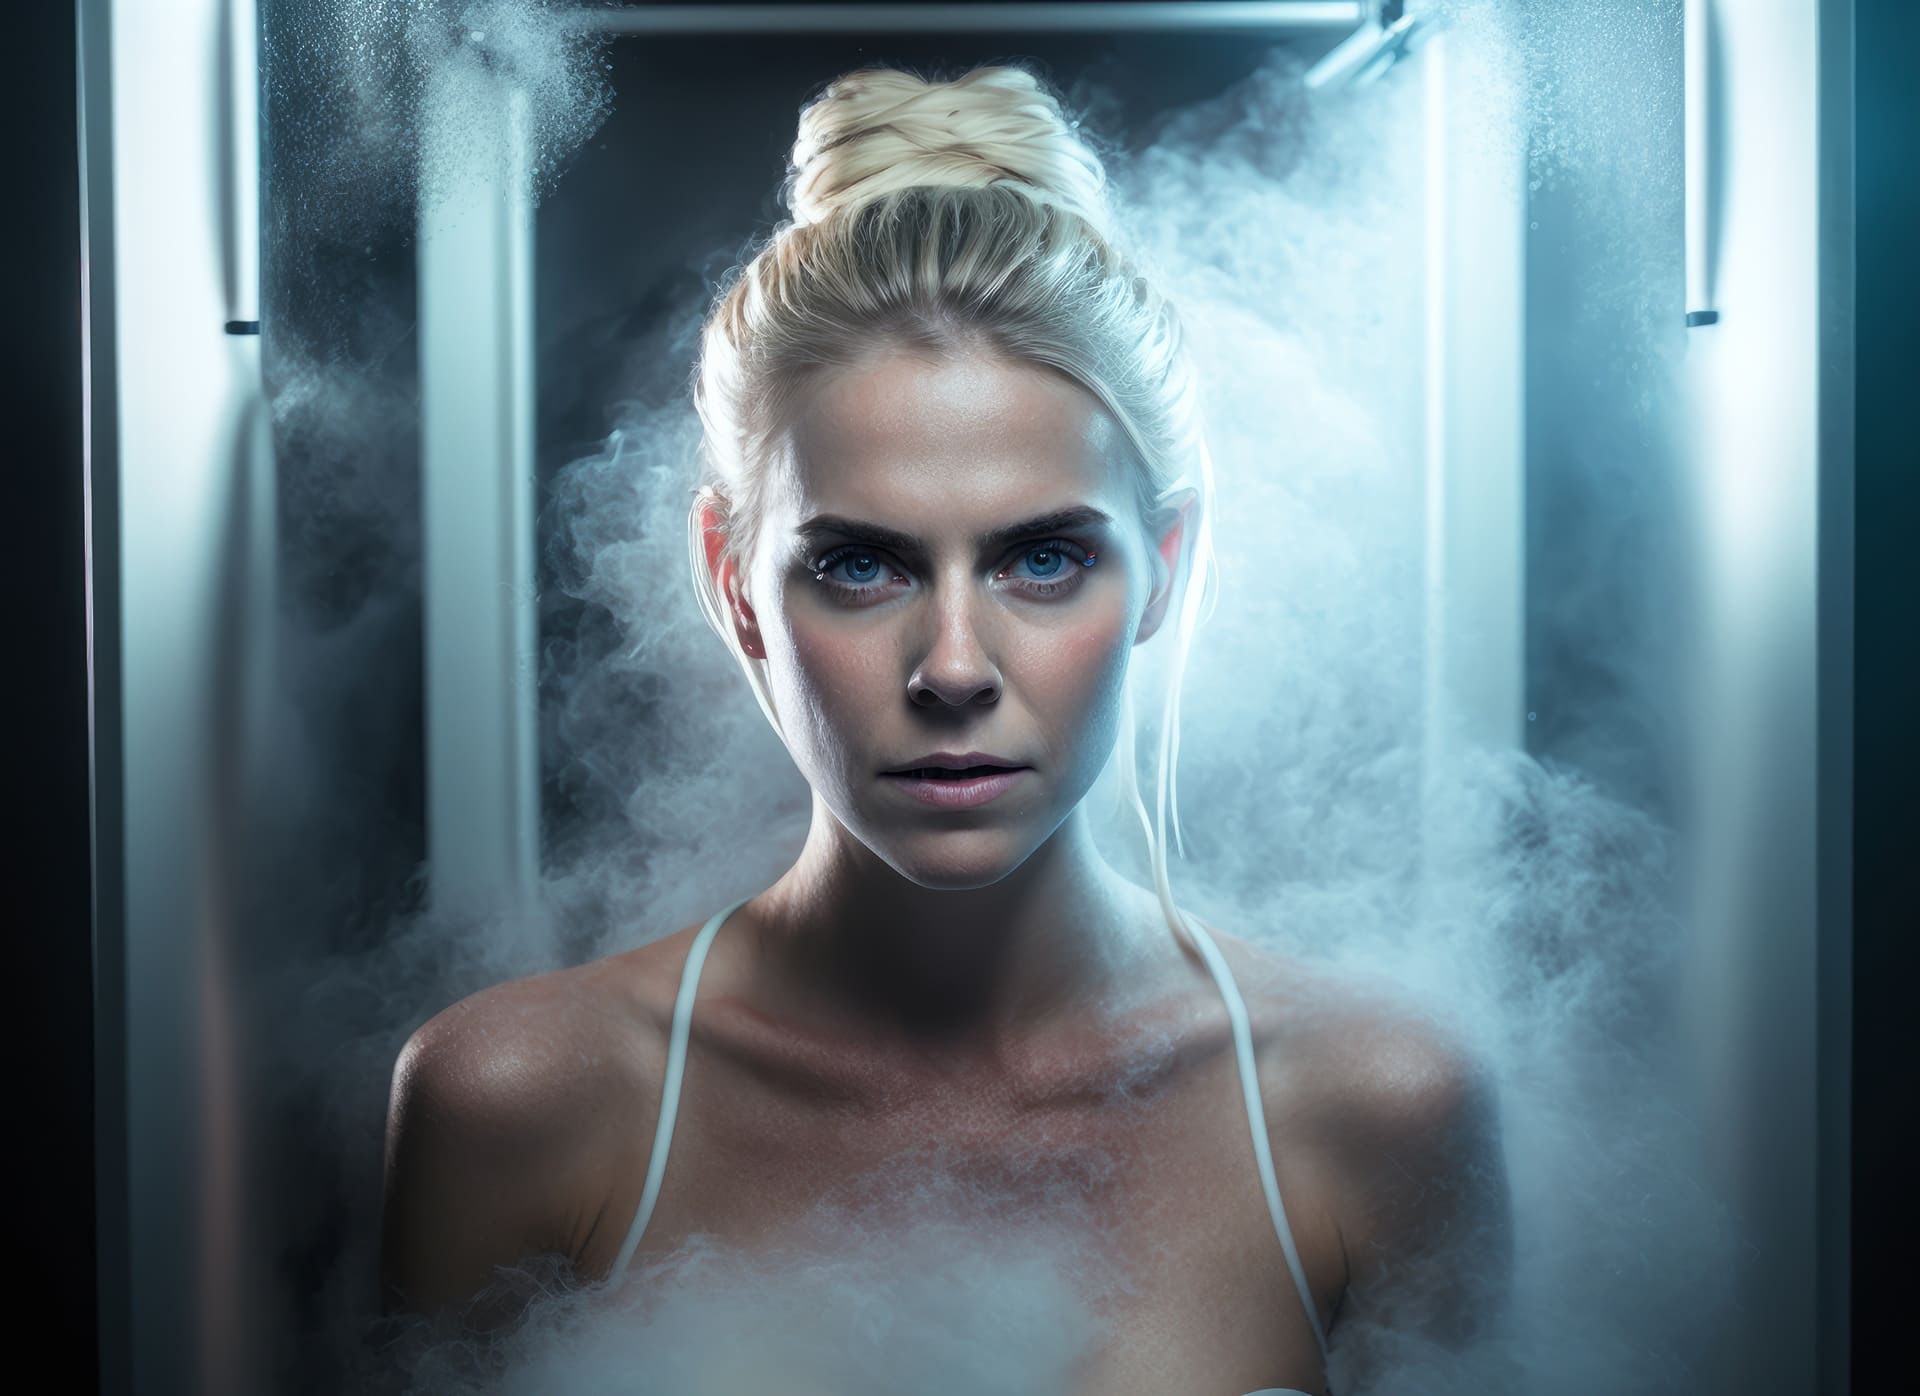 Delray Beach, FL – Delray Beach Cryo, a leading provider of cryotherapy and innovative wellness therapies in South Florida